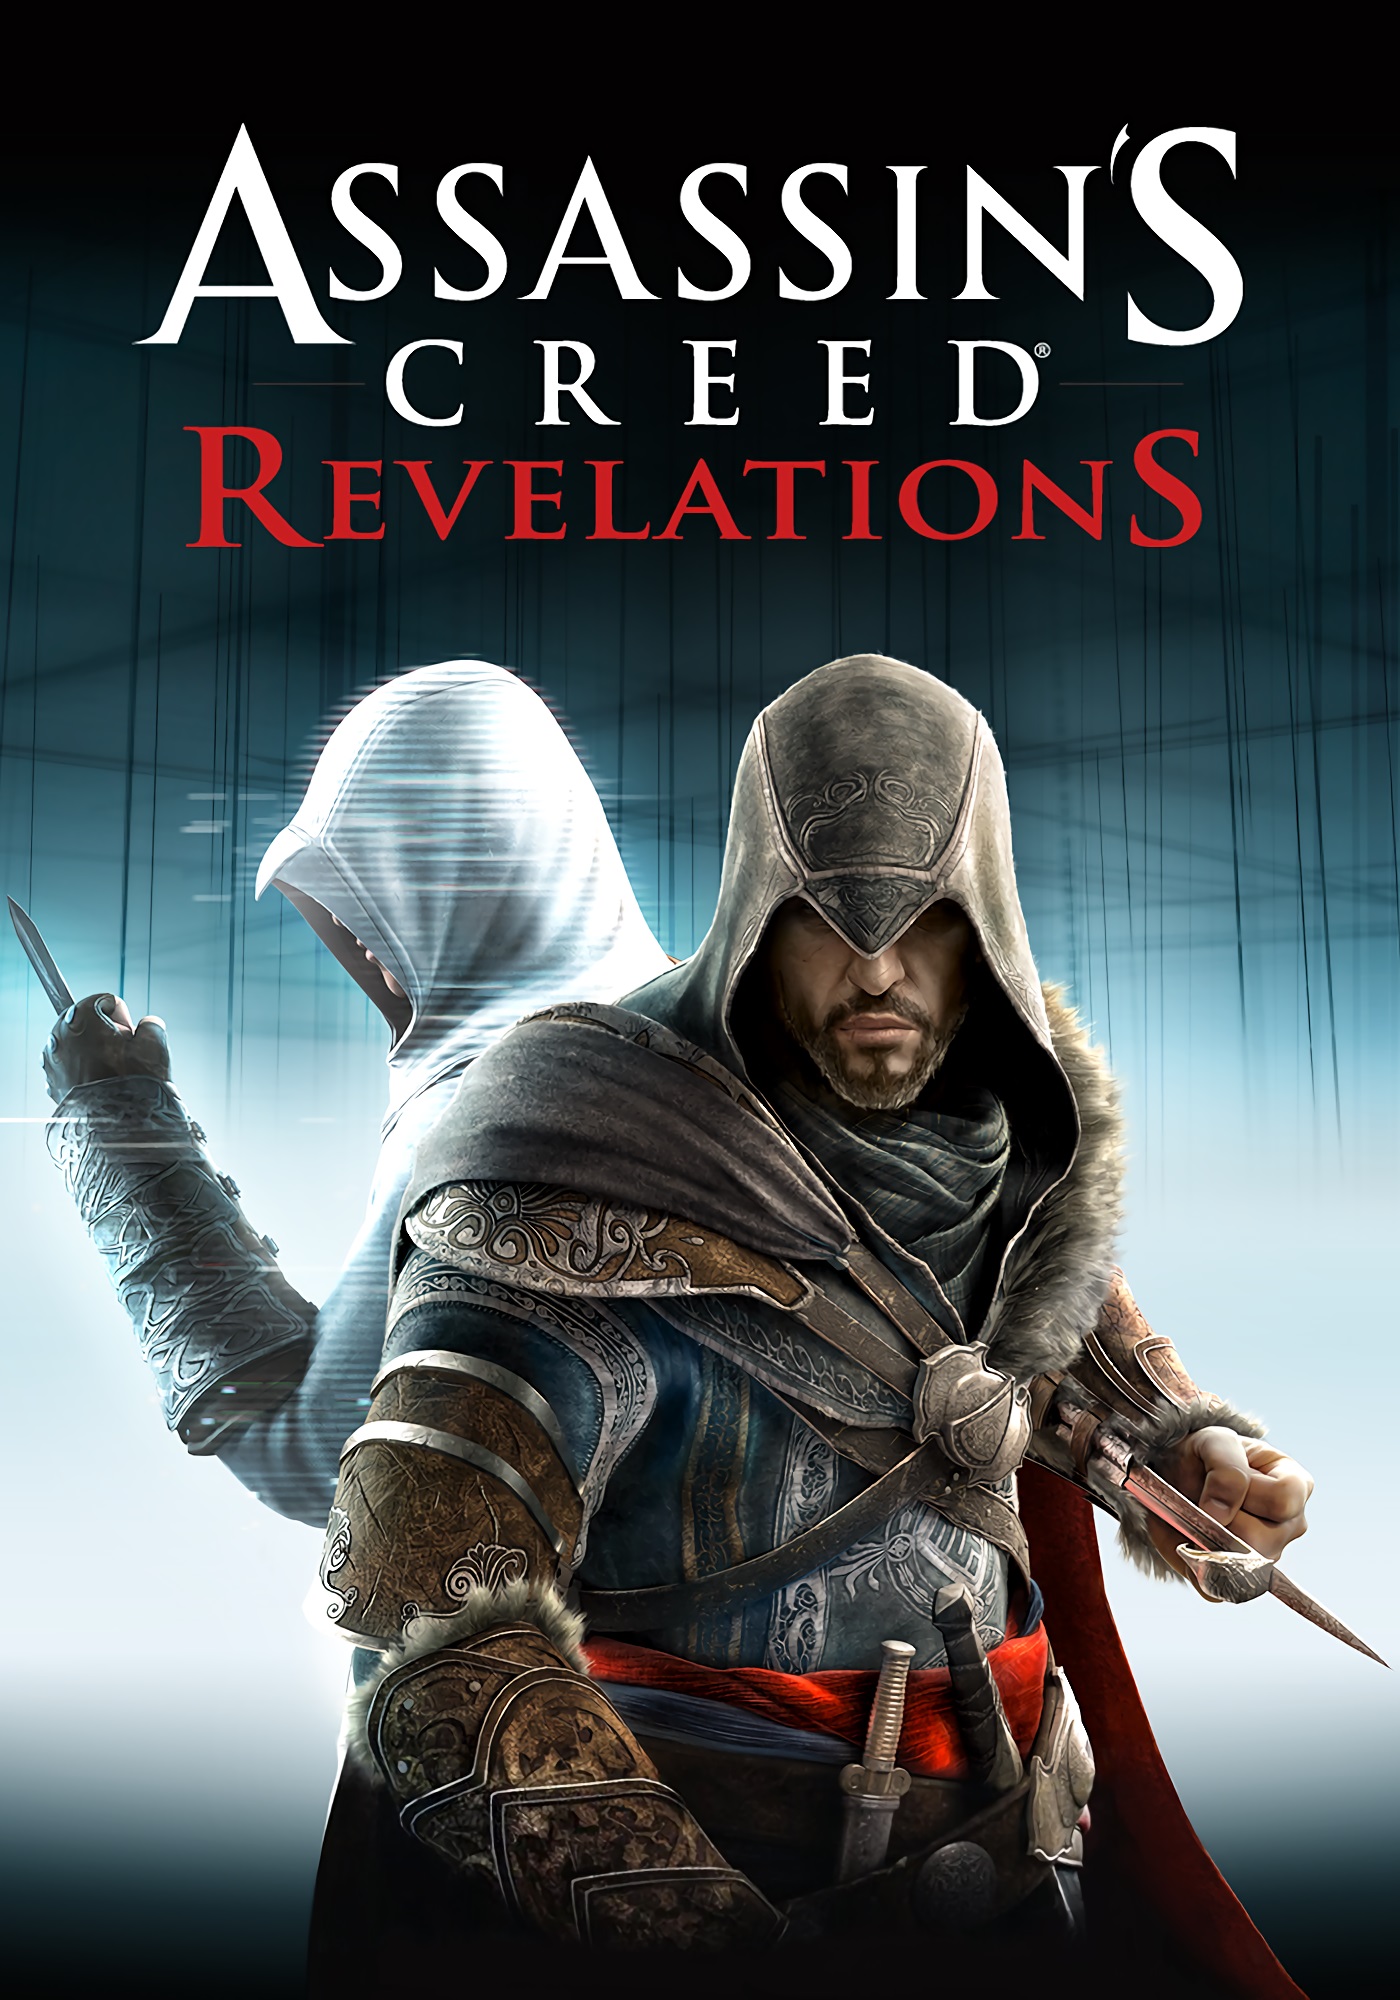 Download Assassin's Creed Revelations Full Game